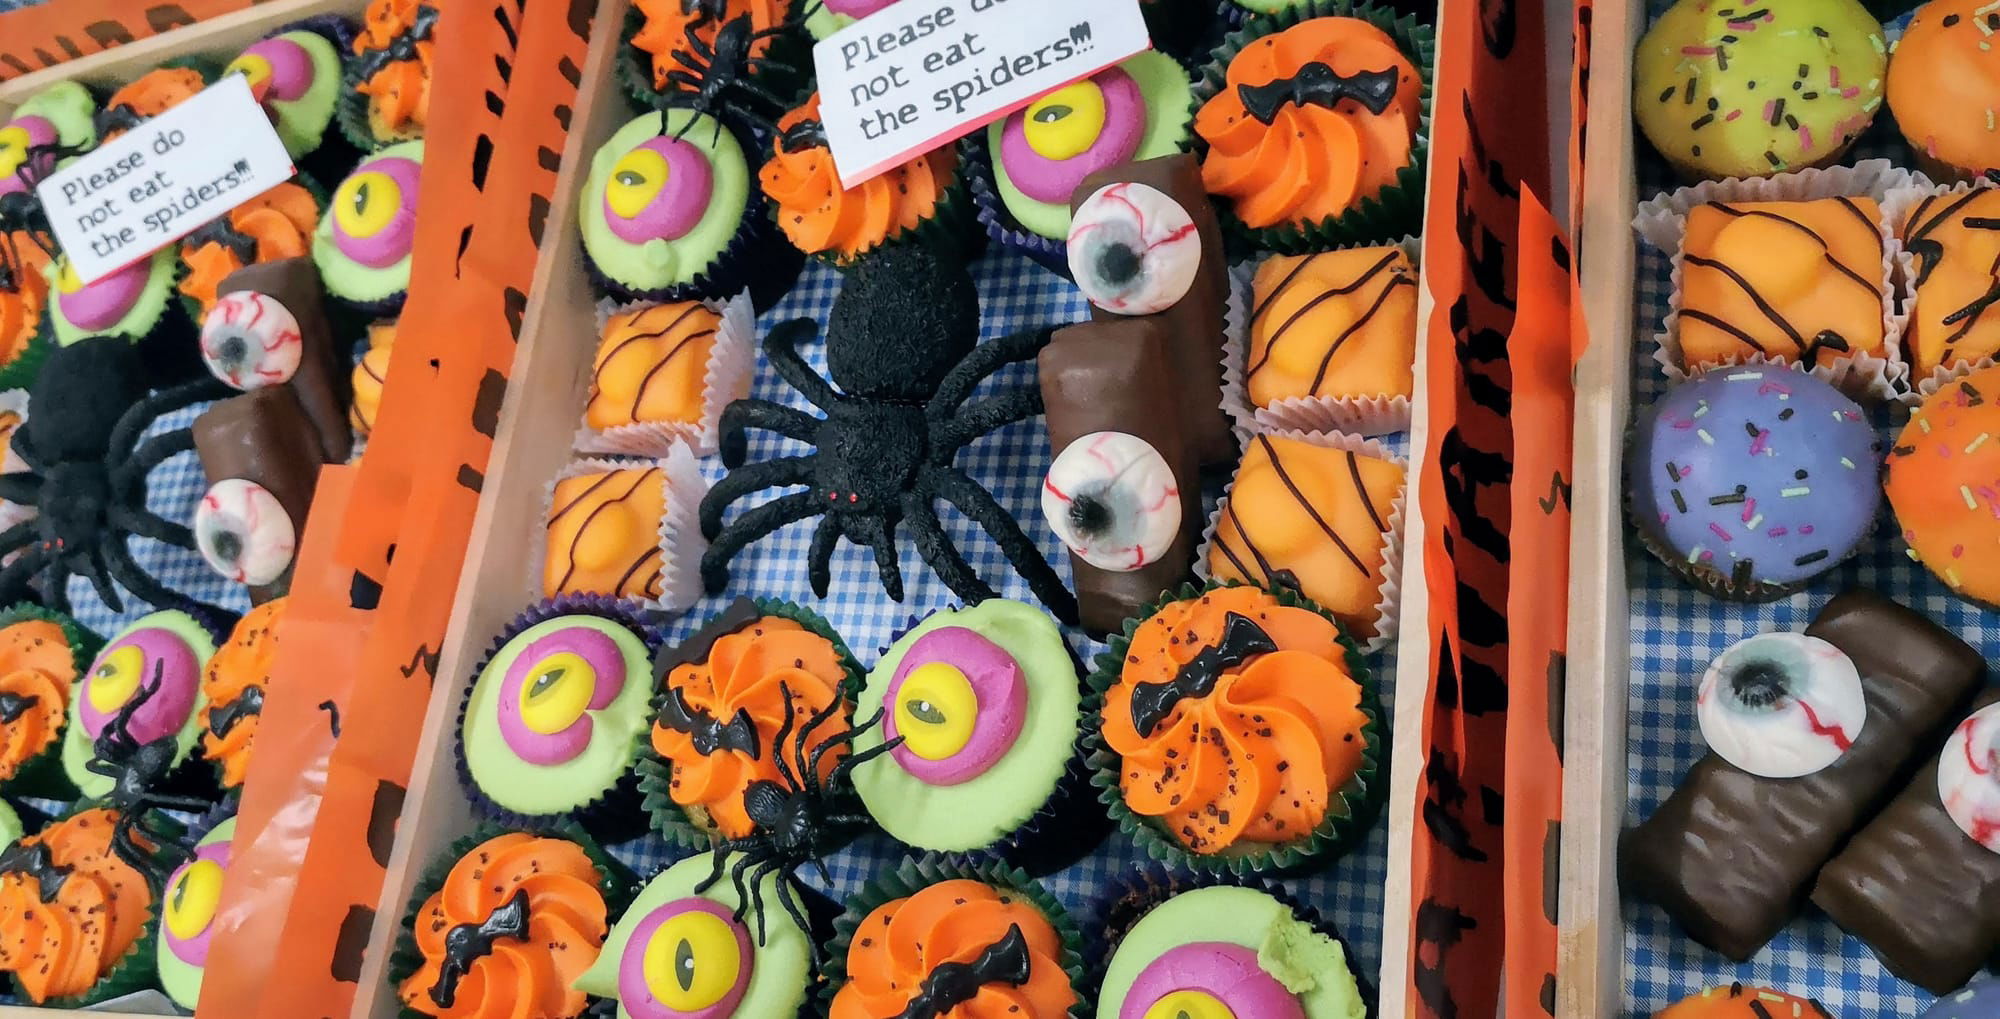 Scary cakes